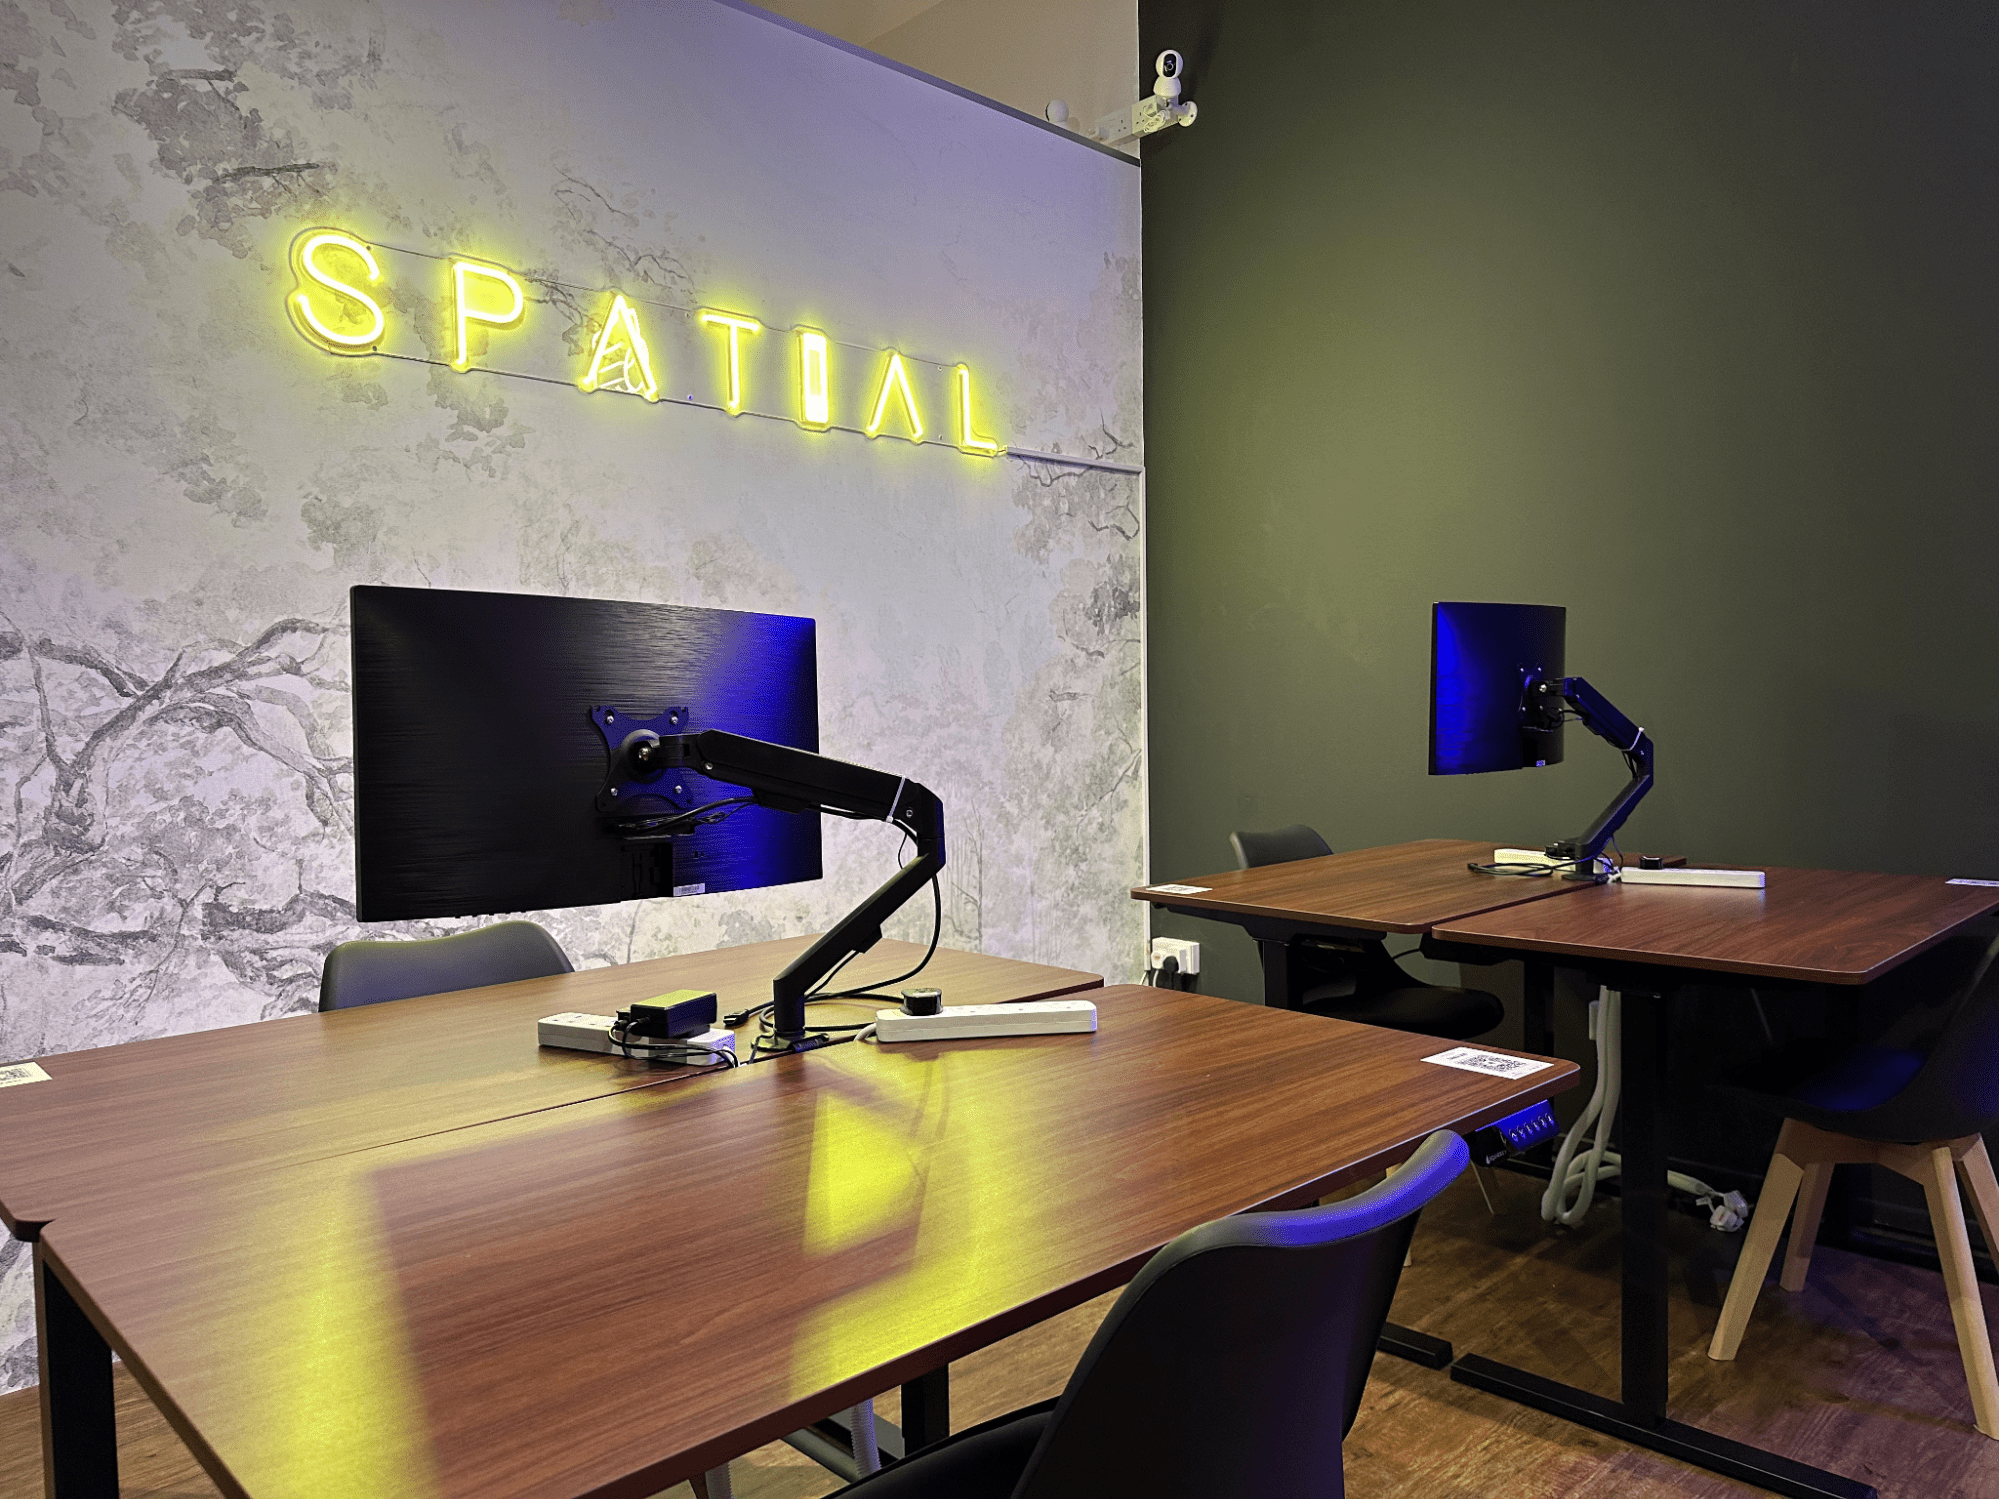 Spatial - Tables with Monitors